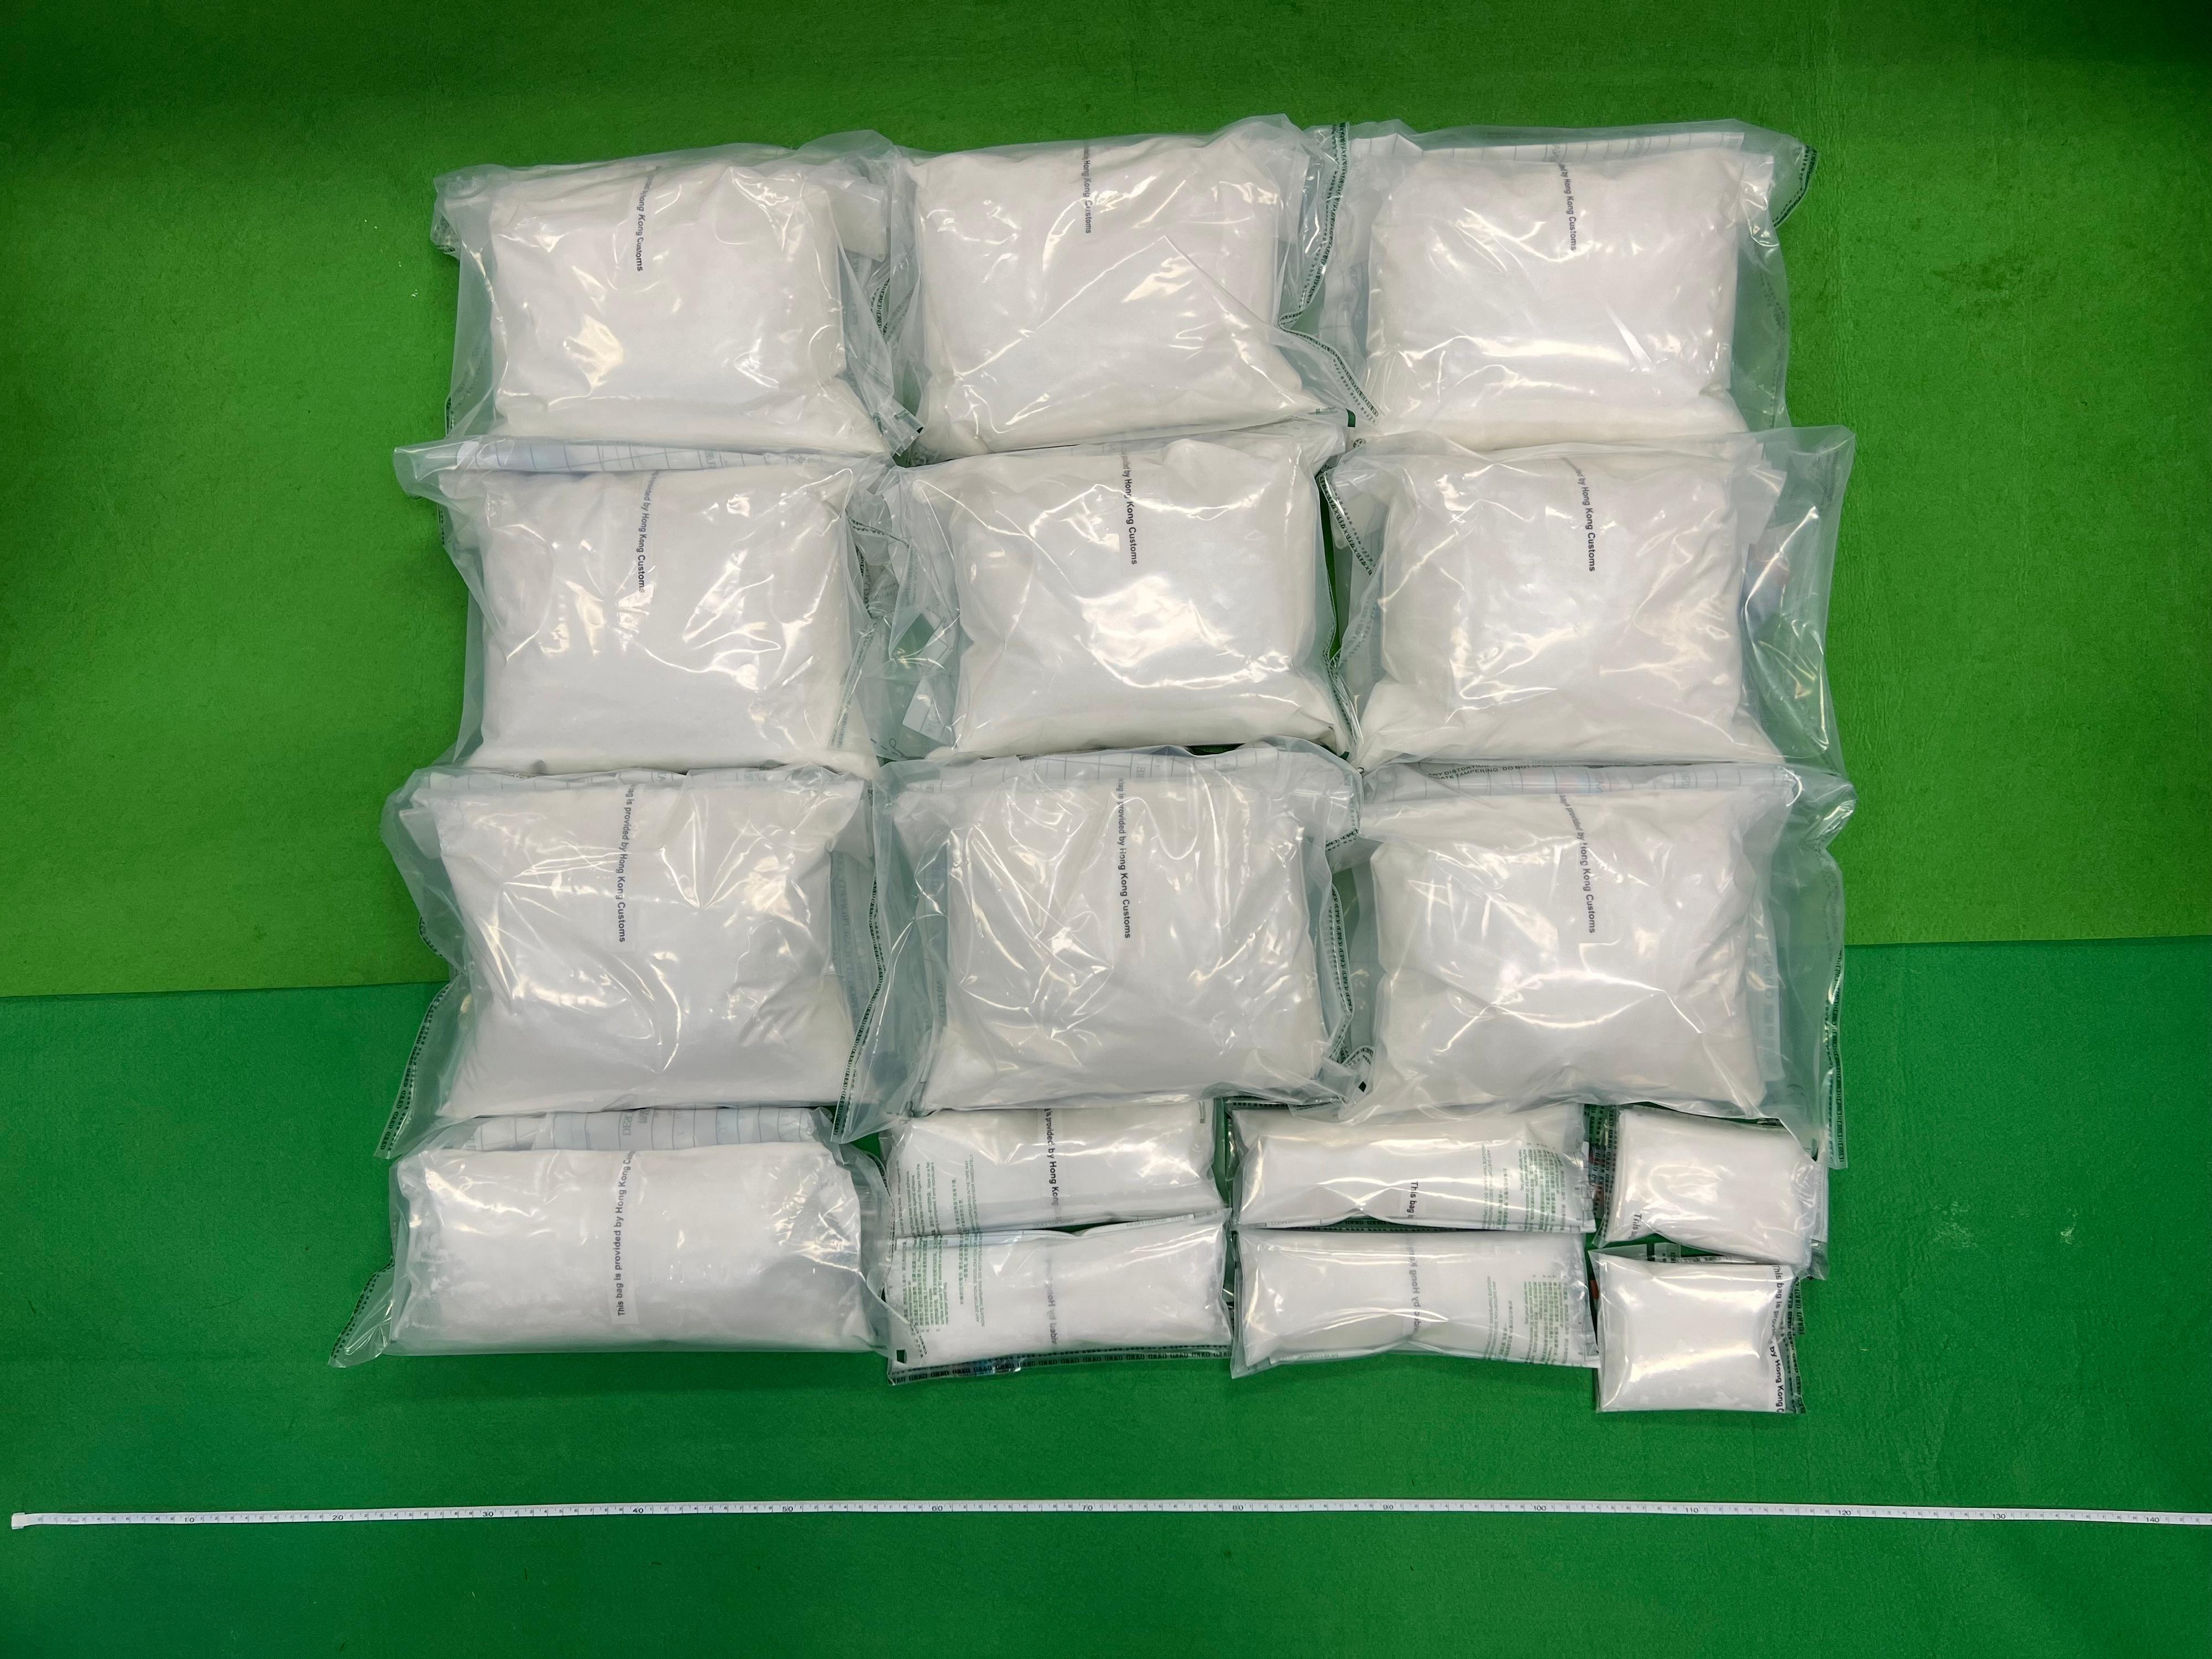 Hong Kong Customs conducted a series of anti-narcotics operations from September 18 to 20 and detected two dangerous drugs trafficking cases. Suspected dangerous drugs worth about $24 million in total were seized at the Shenzhen Bay Control Point and in various districts across the territory. The seizures include about 41 kilograms of suspected ketamine, about 1kg of suspected cocaine, about 1kg of suspected heroin, about 100 grams of suspected crack cocaine, a small quantity of suspected herbal cannabis. Photo shows the suspected ketamine seized in the first case.